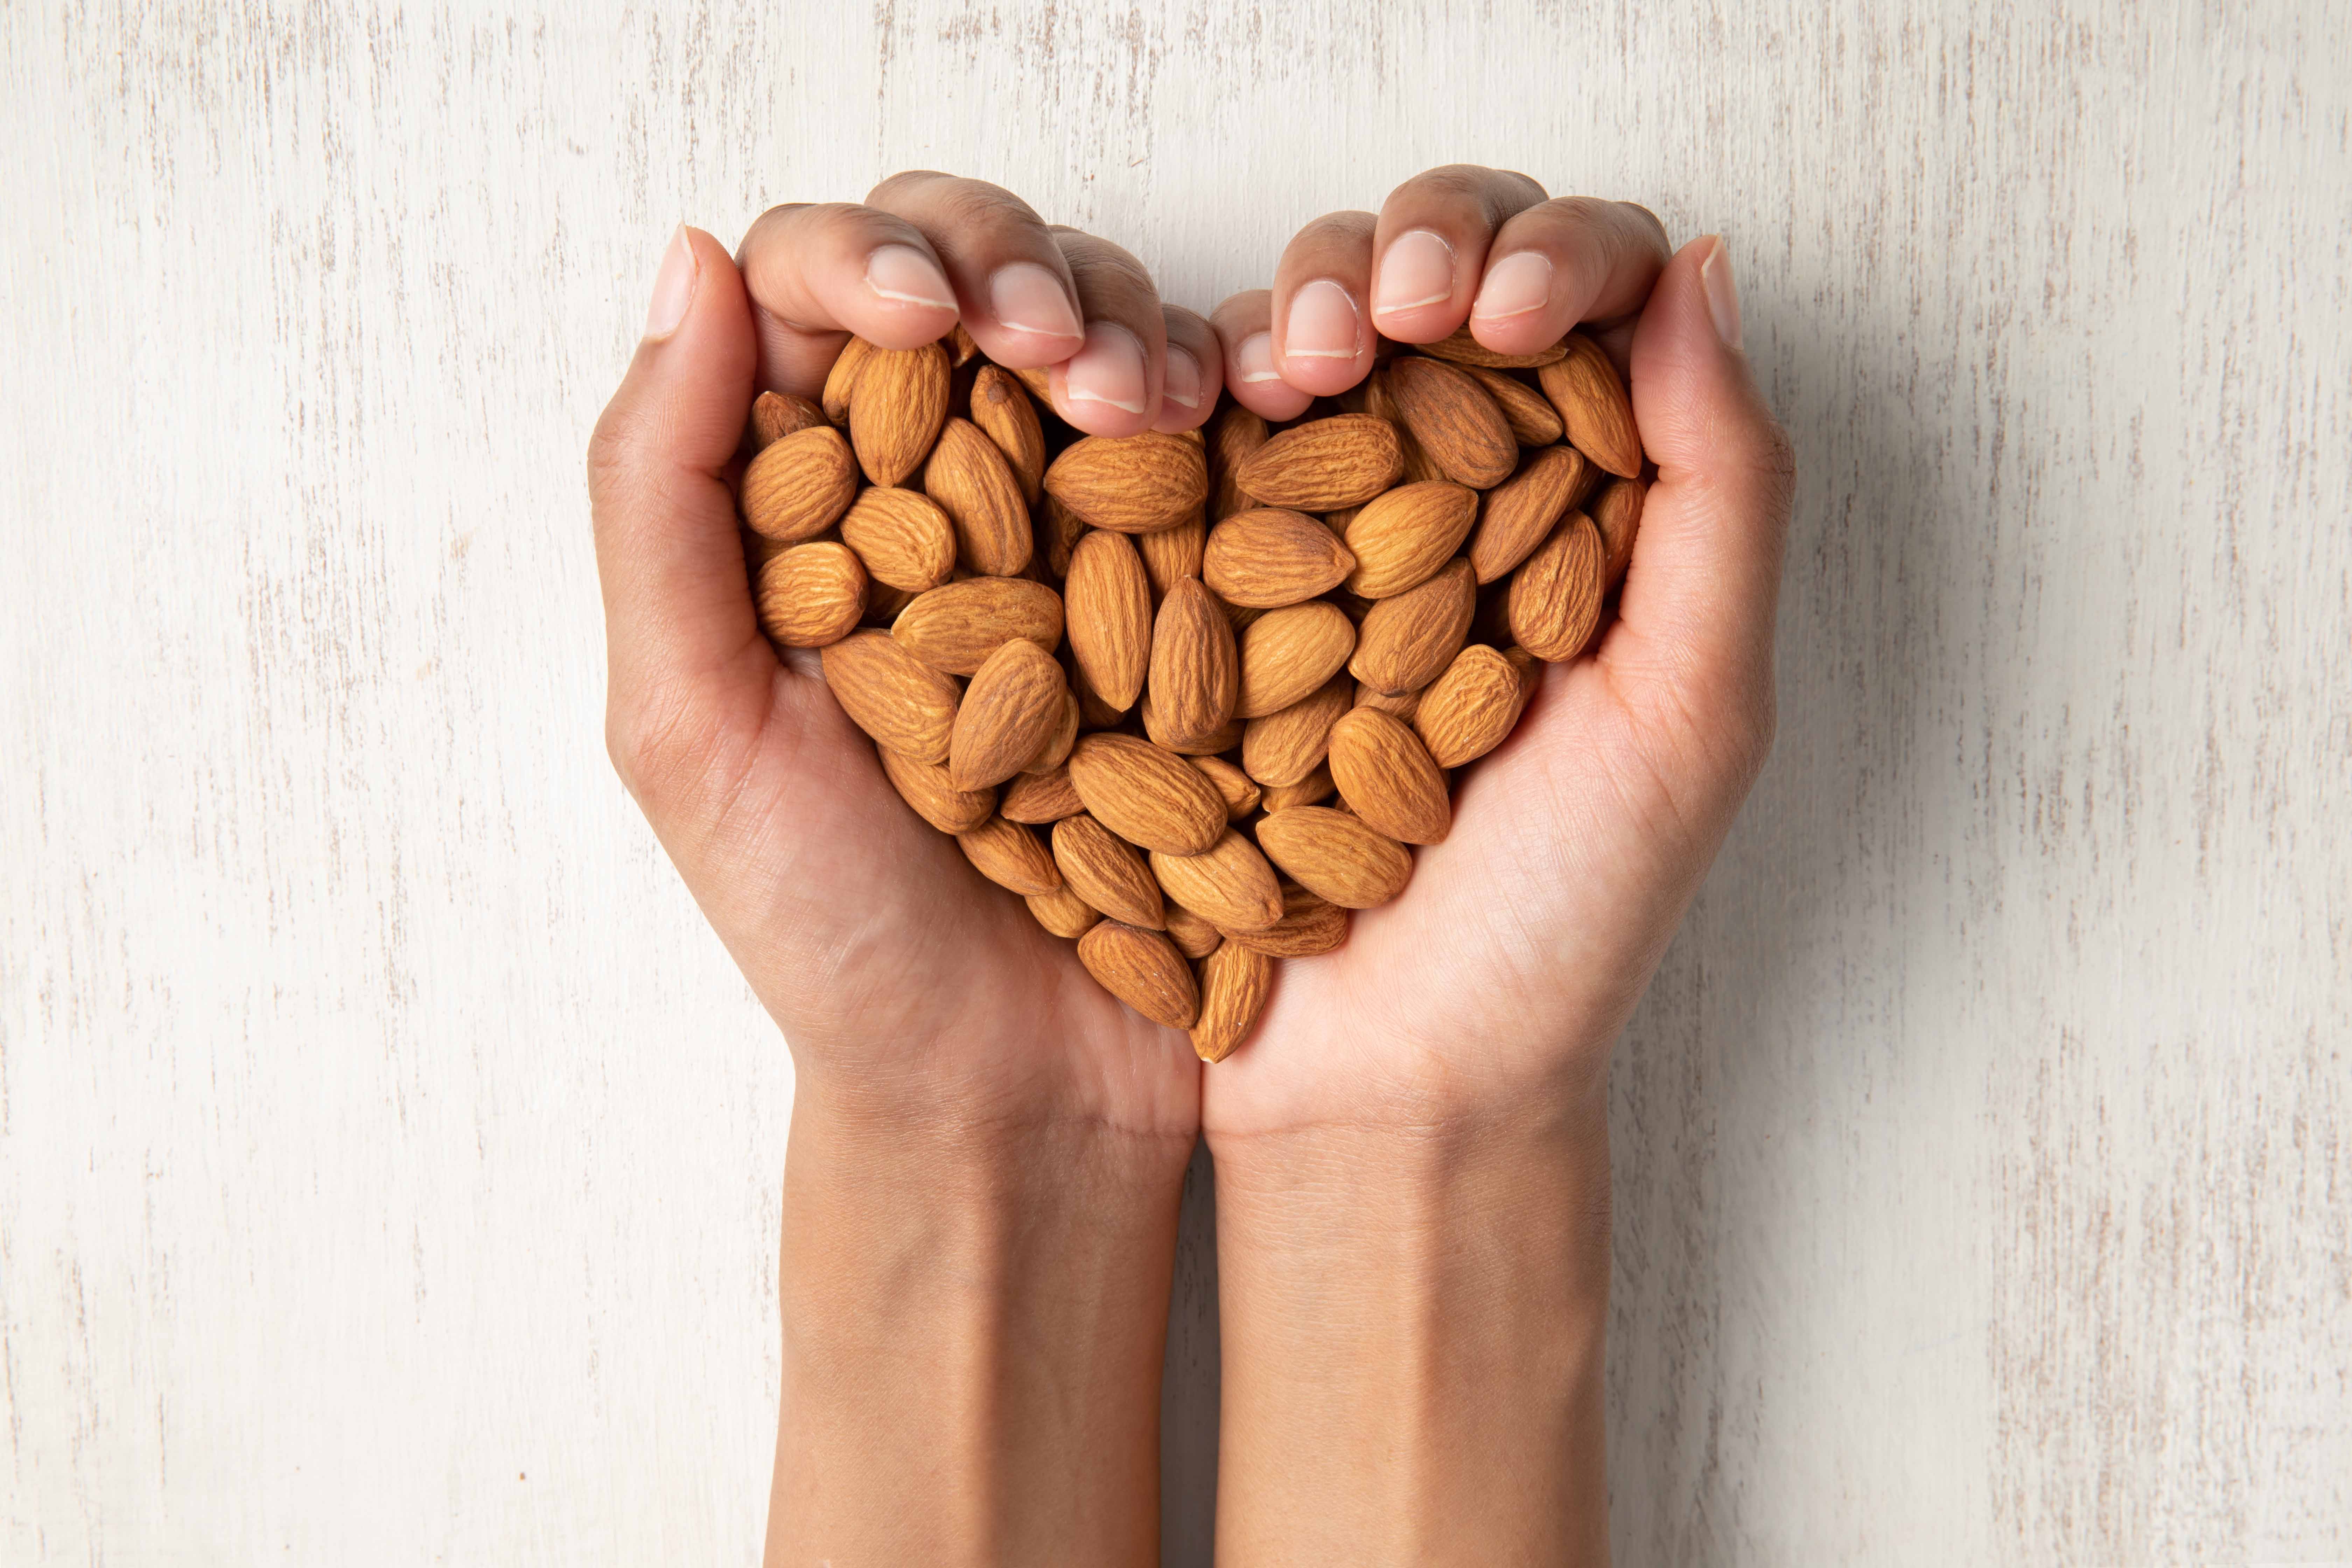 This World Heart day, give your heart the gift of good health with almonds